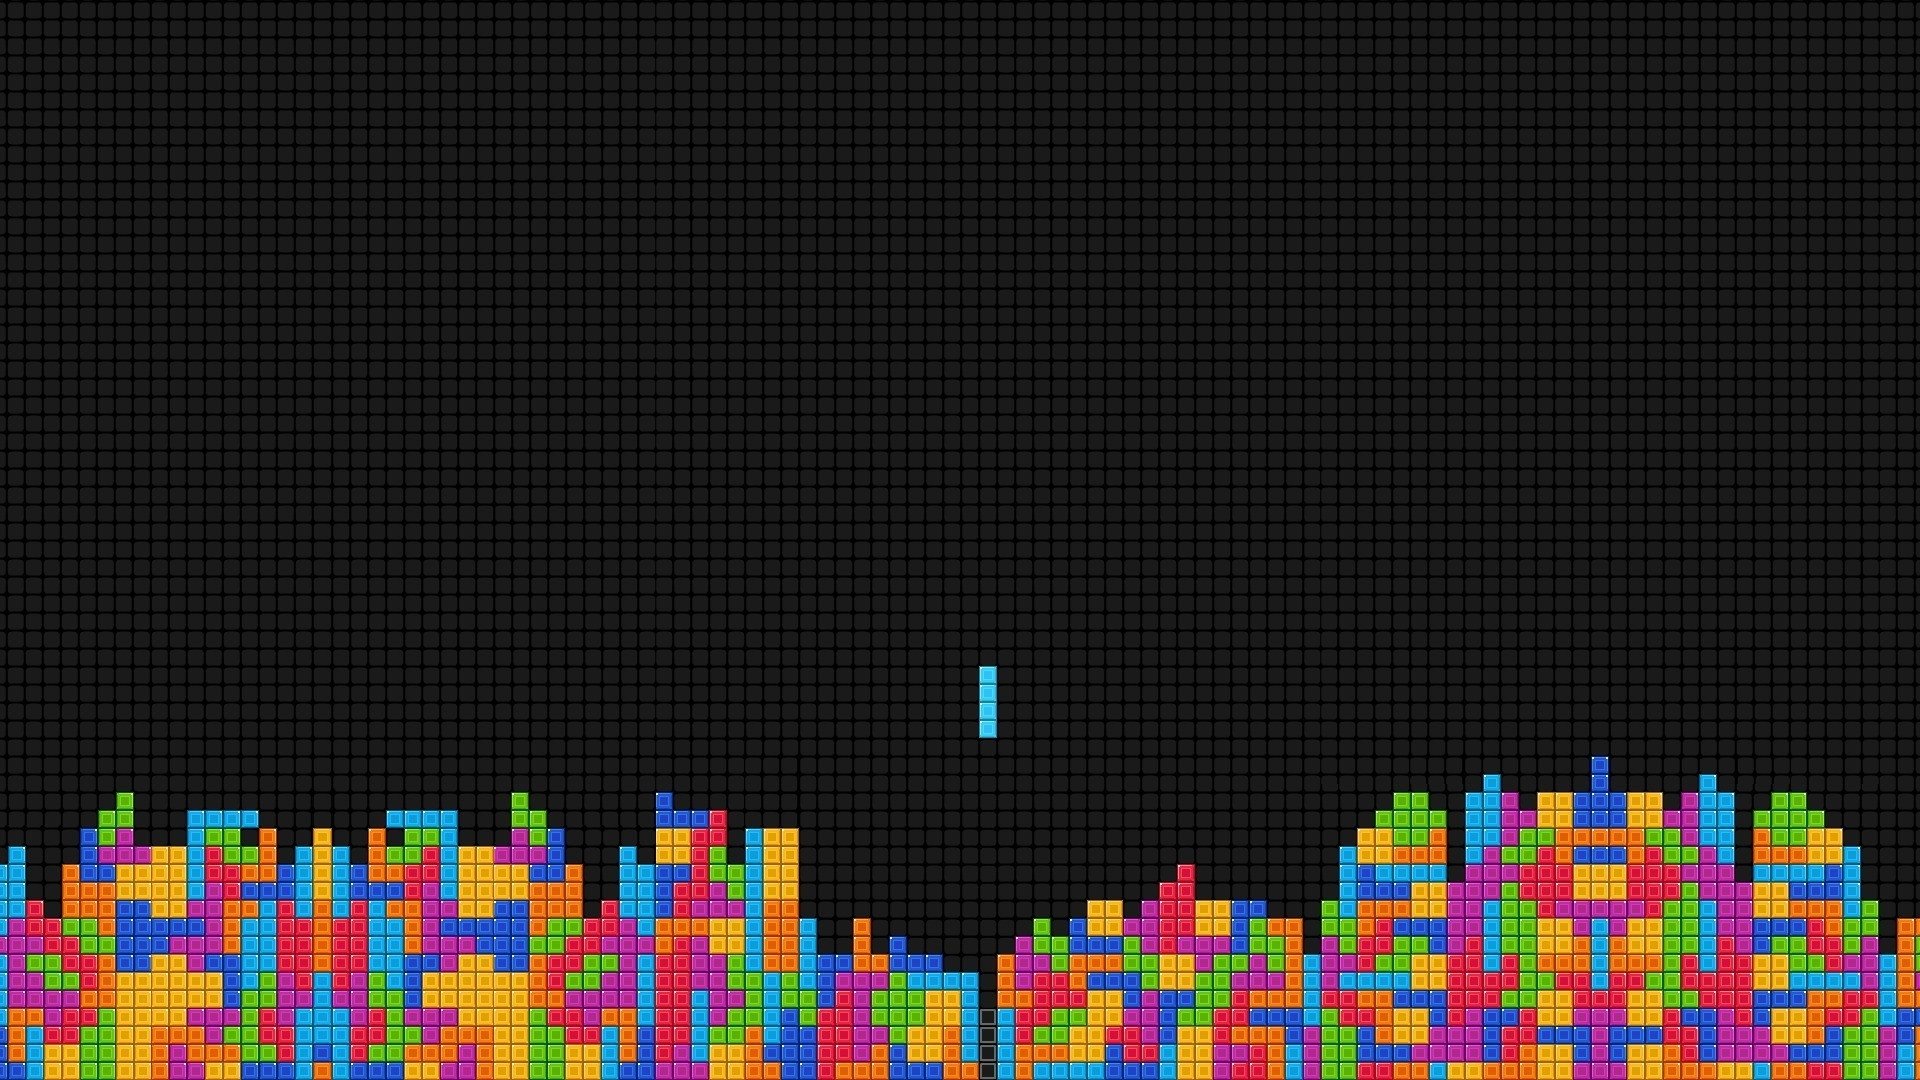 Tetris HD Wallpapers and Background Images   stmednet